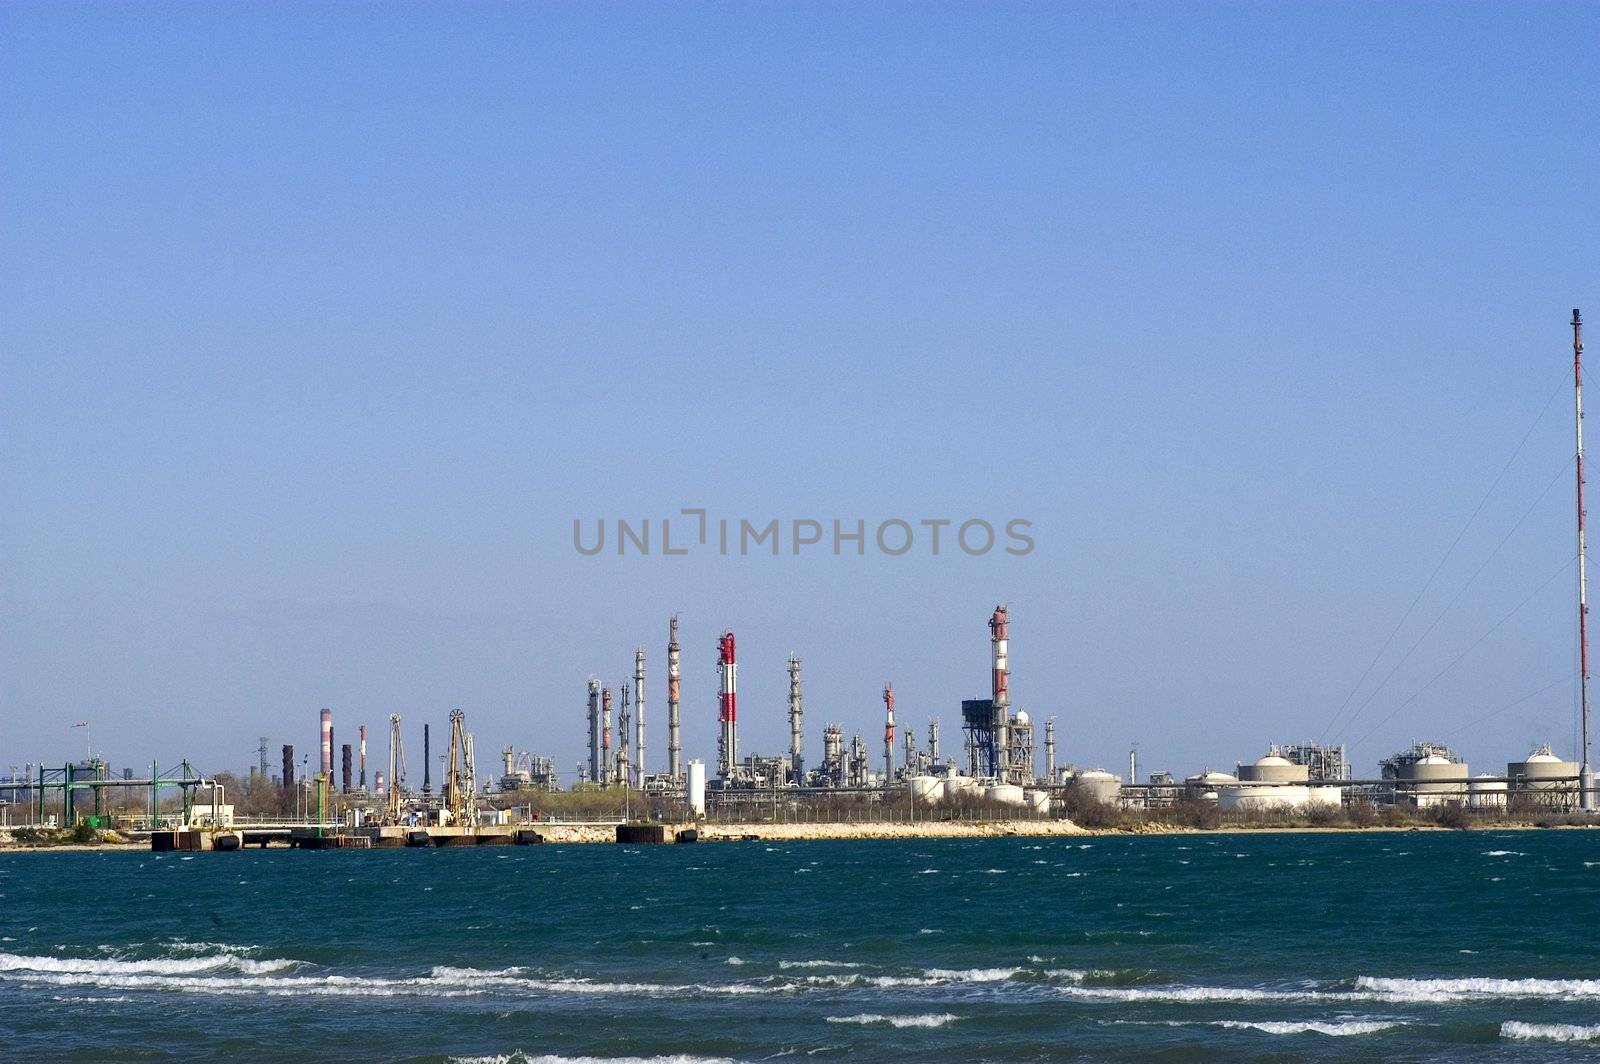 Petrochemical industry by gillespaire